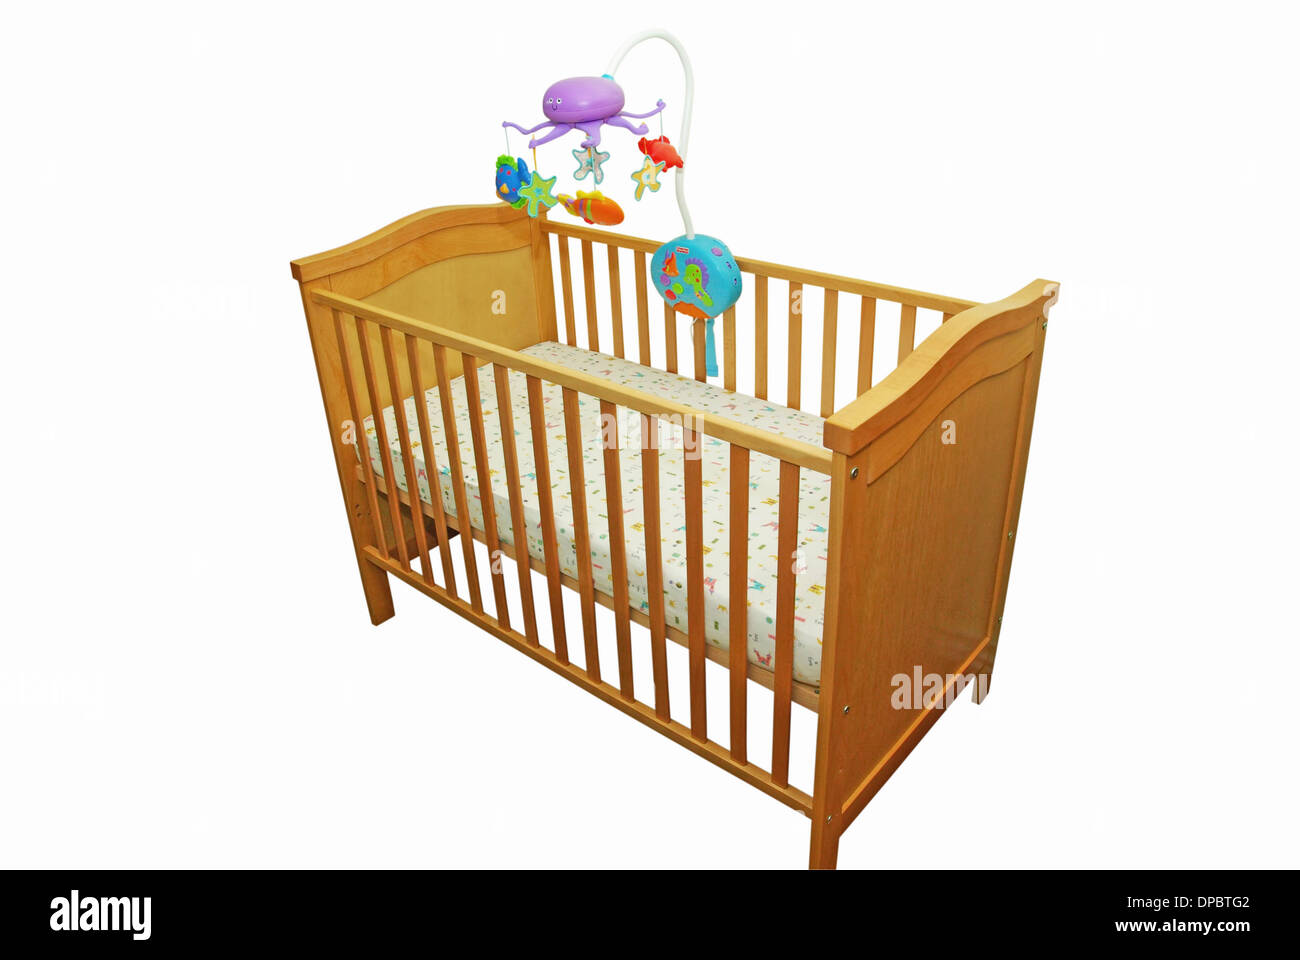 Baby's bed with a carousel isolated on white Stock Photo - Alamy